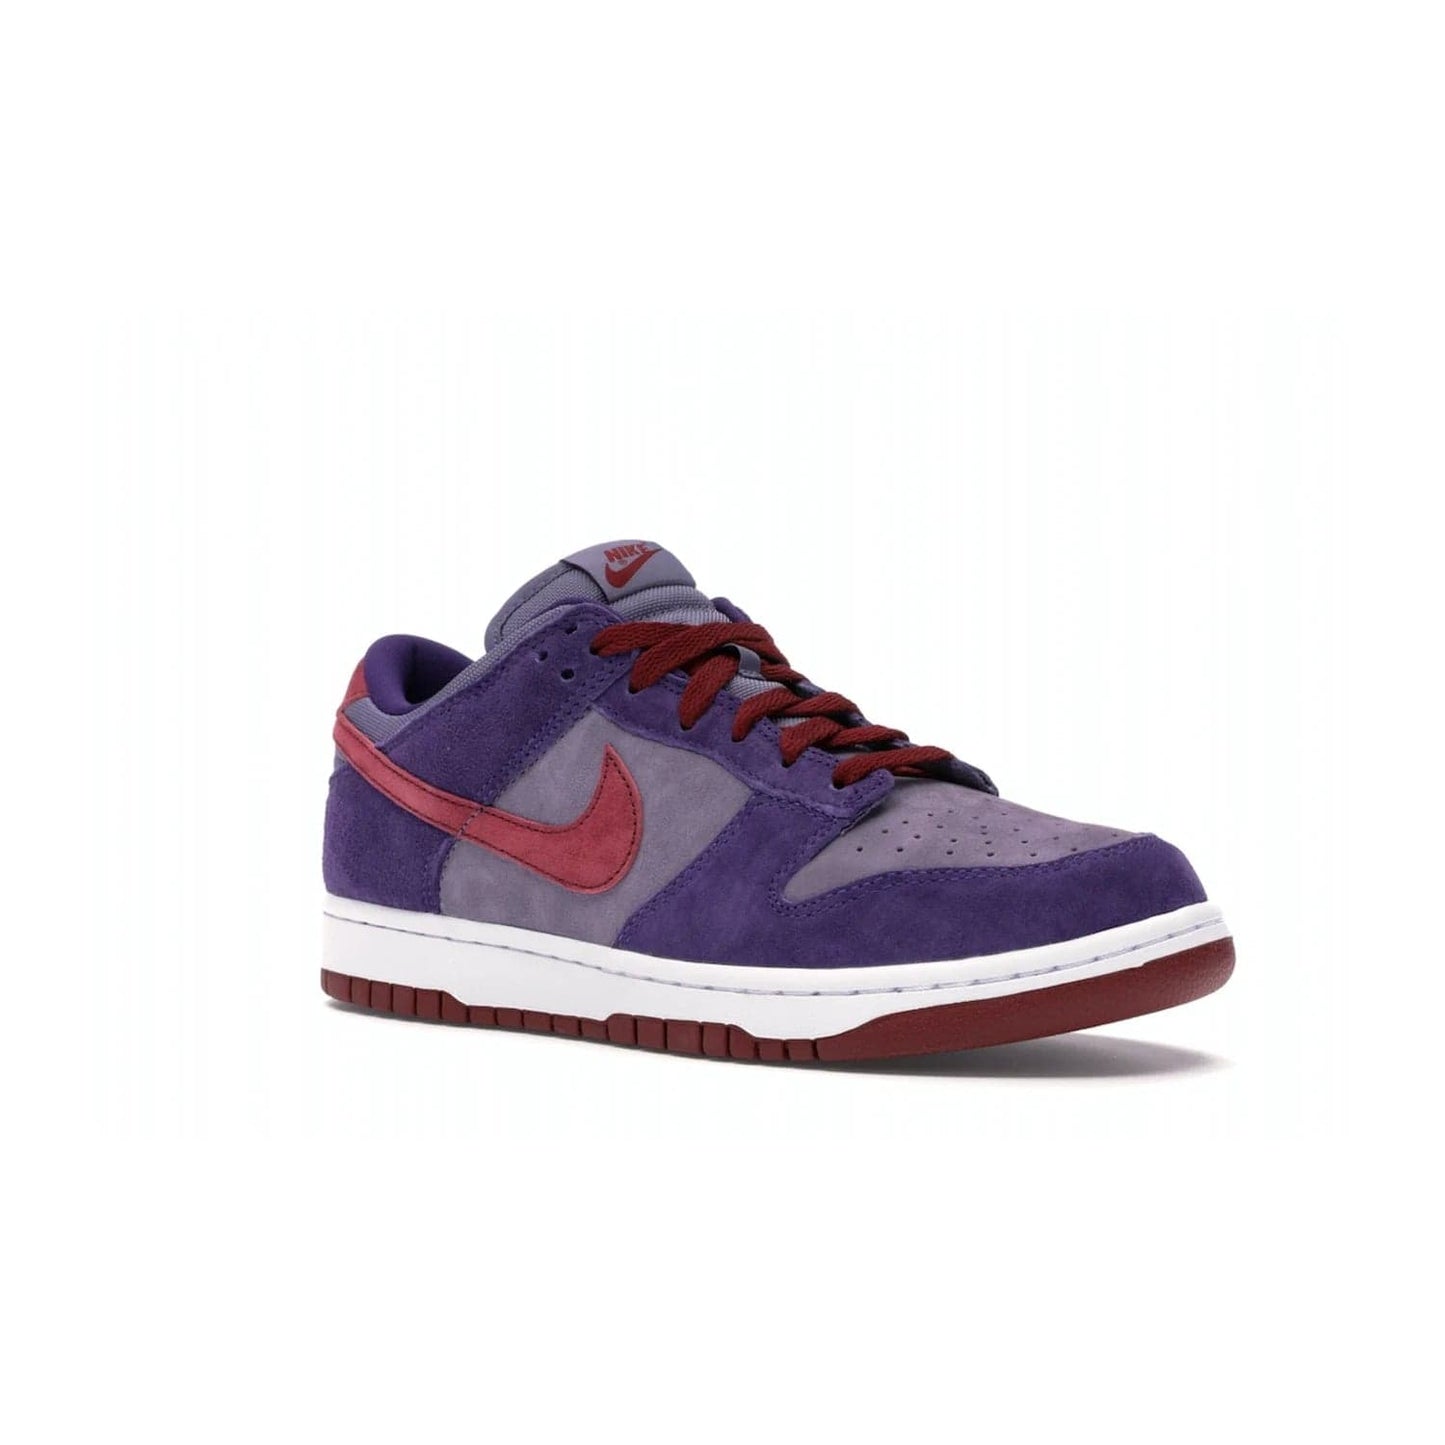 Nike Dunk Low Plum (2020) - Image 5 - Only at www.BallersClubKickz.com - Elevate your look with the Nike Dunk Low Plum (2020). Featuring a bold purple colorway, this retro-inspired silhouette is constructed of premium suede and makes for a must-have for any sneakerhead.